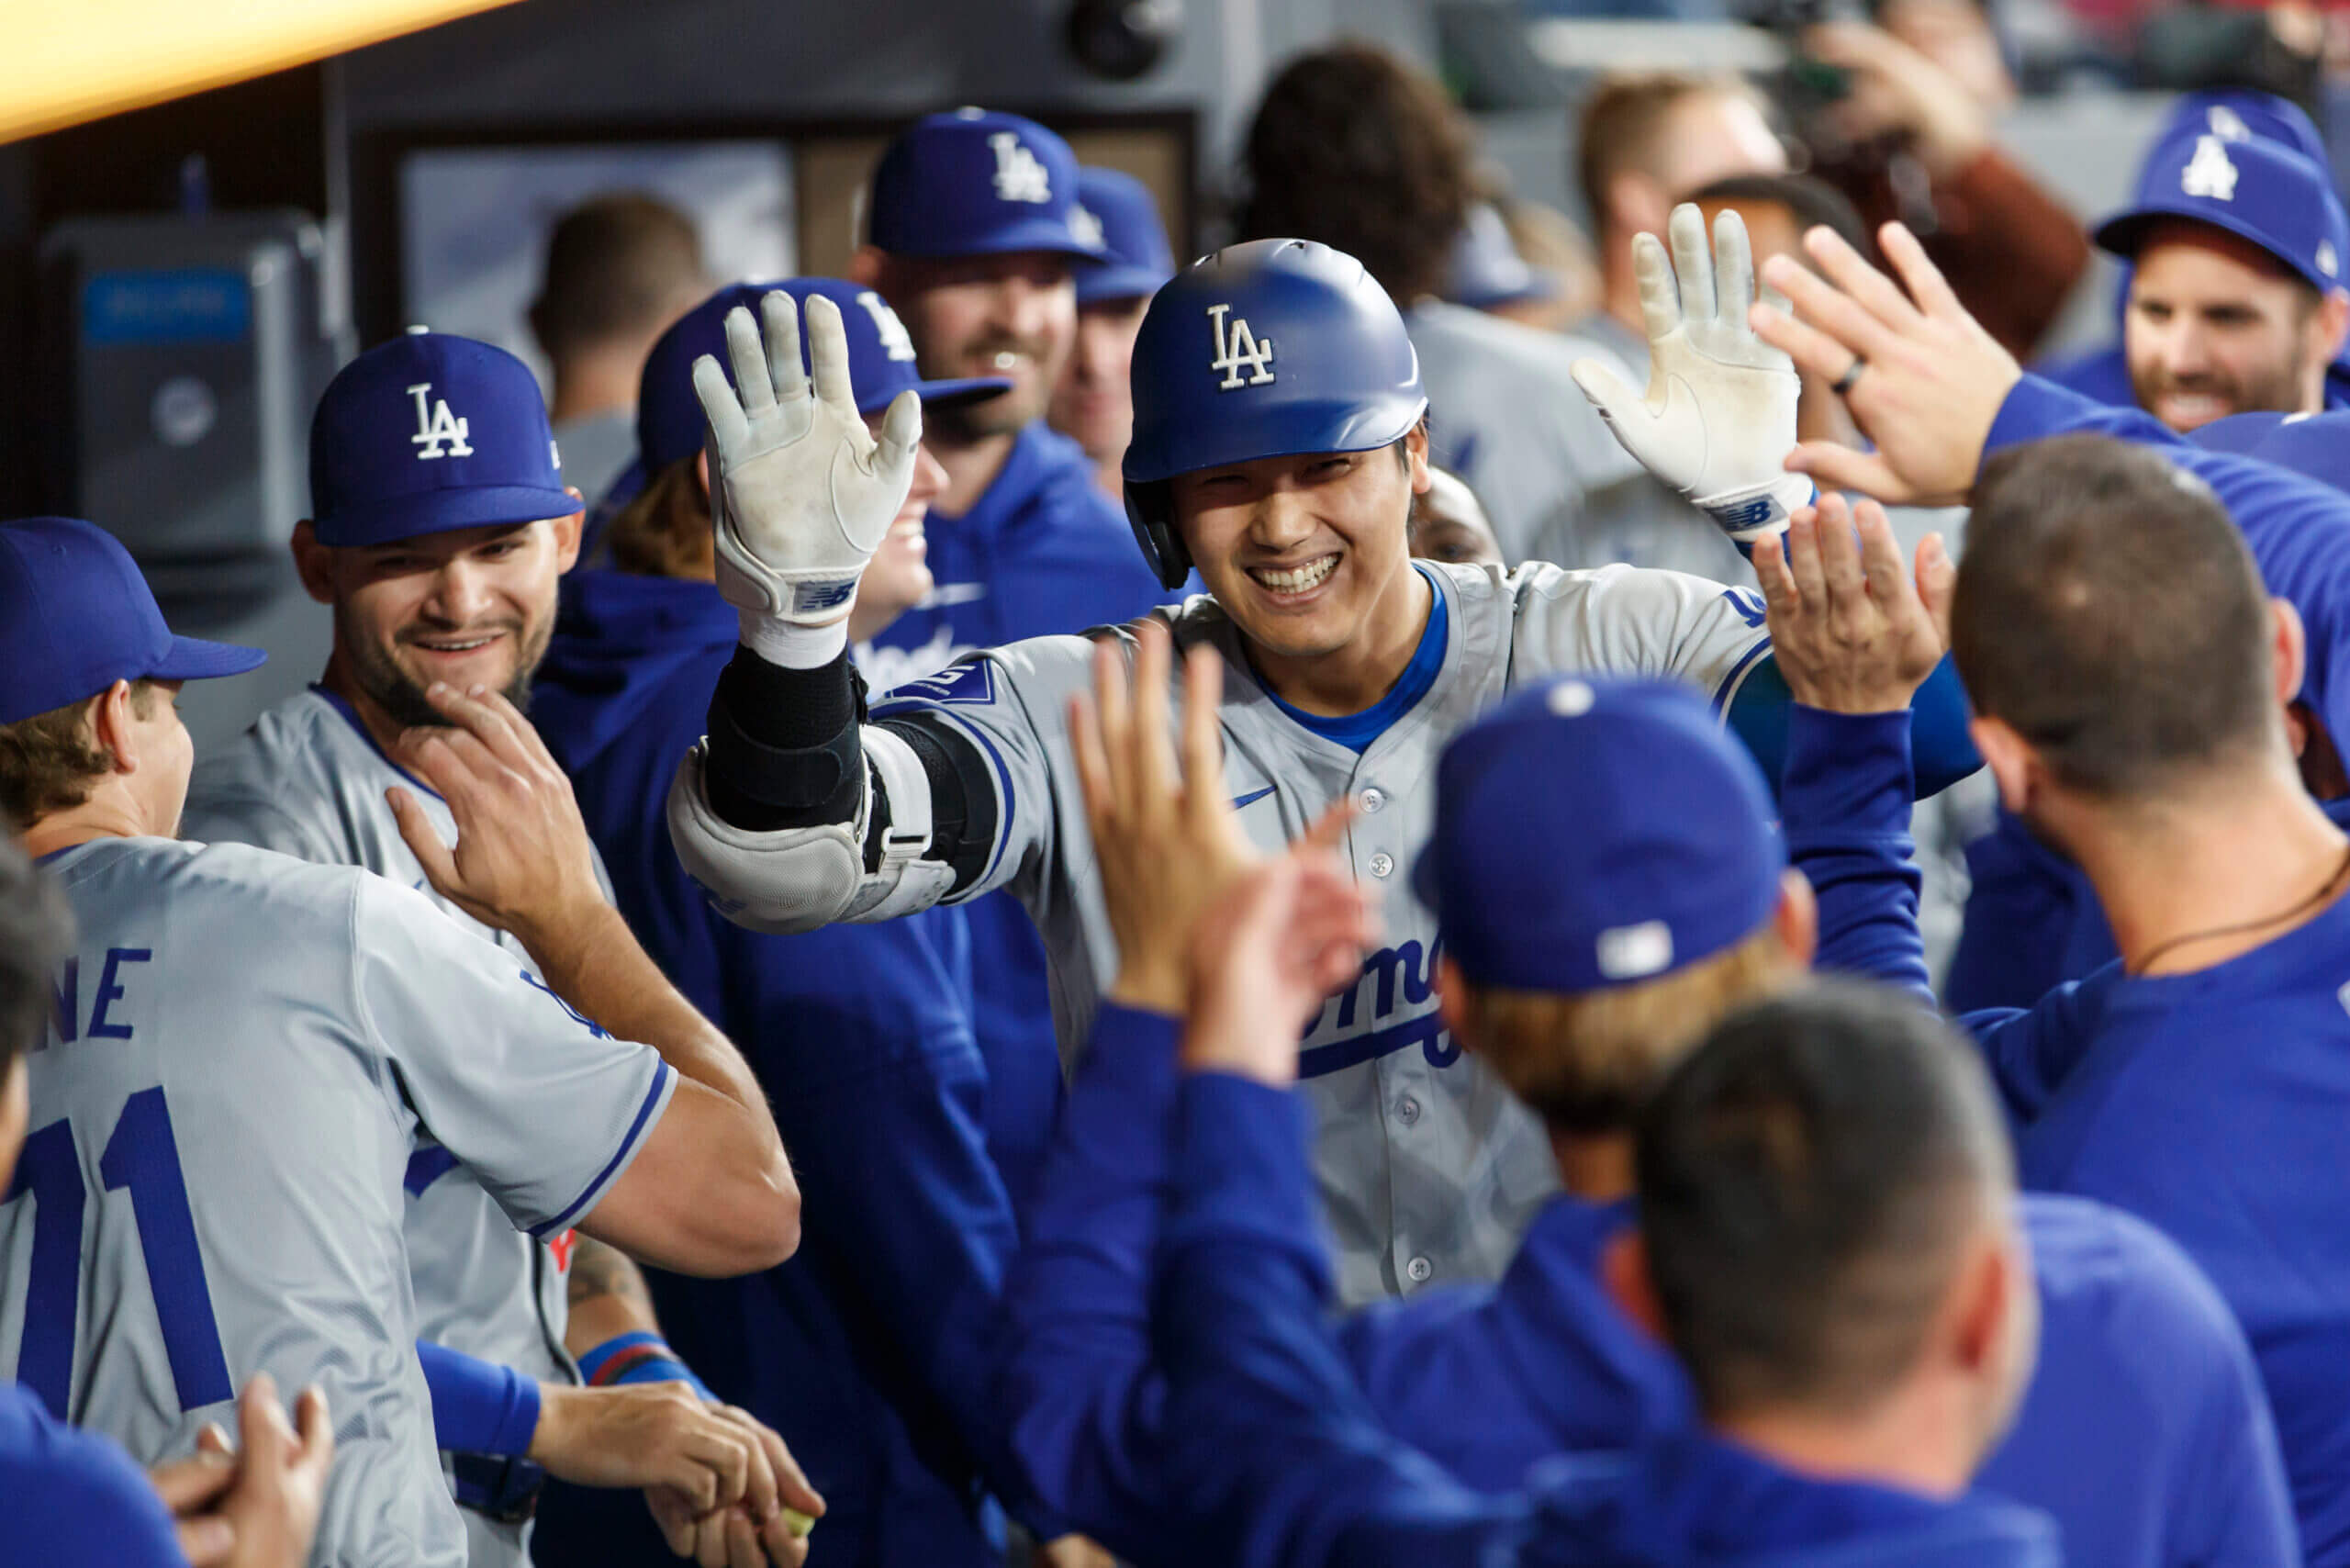 Shohei Ohtani silences Toronto boos early in his latest Dodgers moment